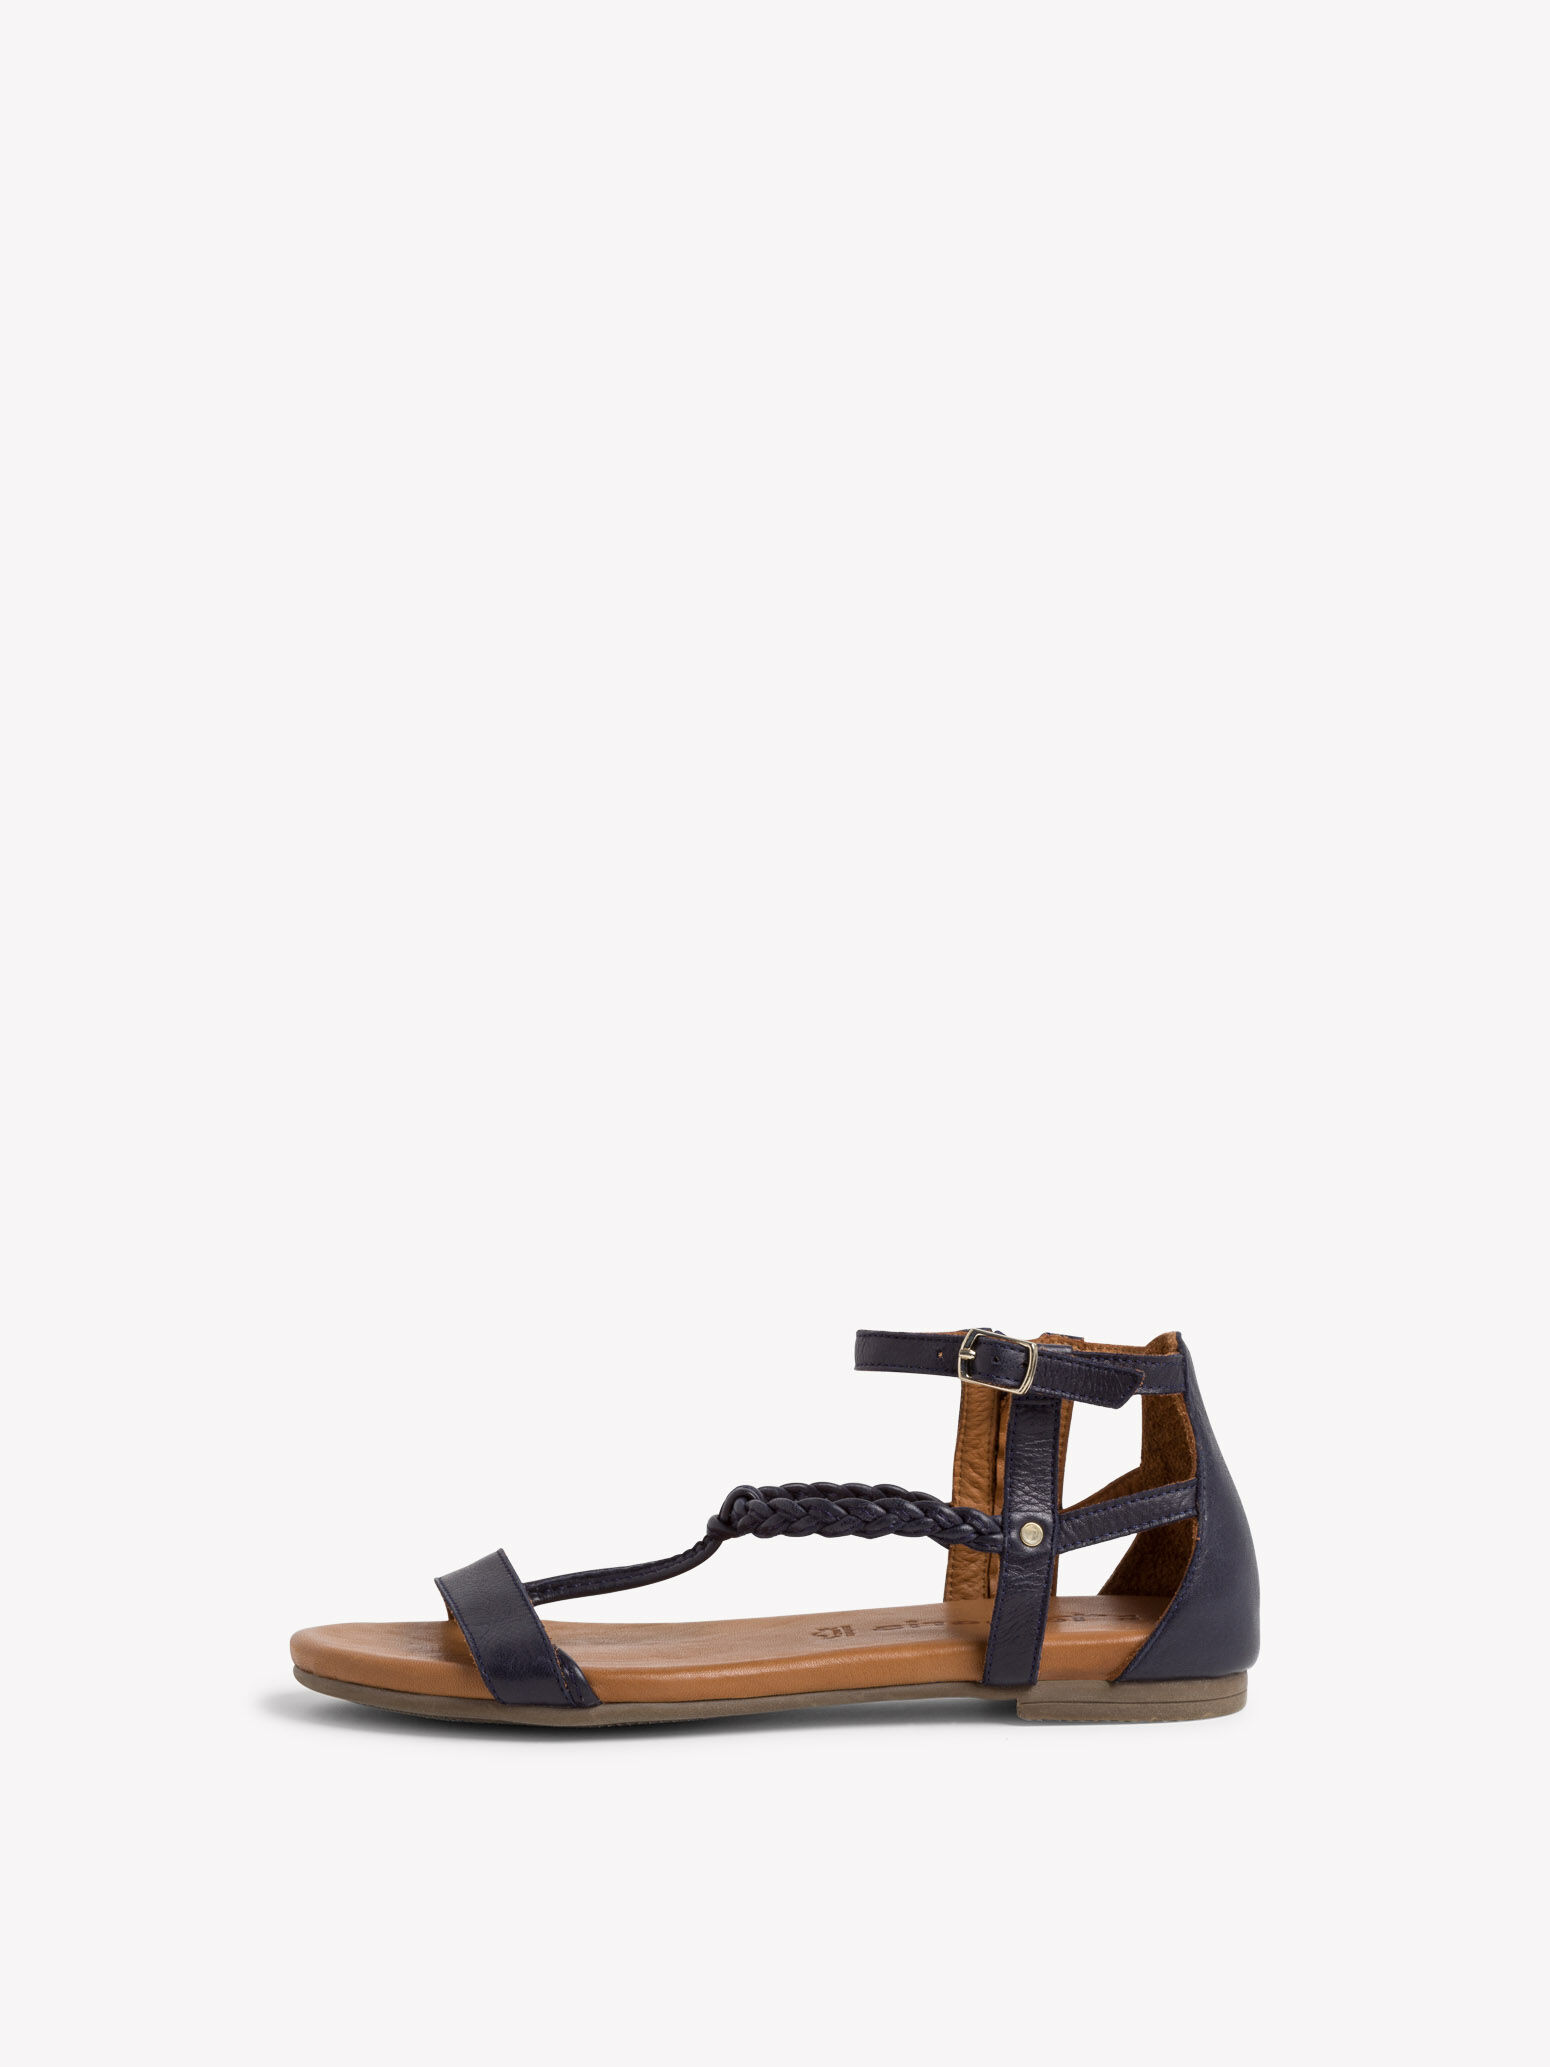 leather sandals online